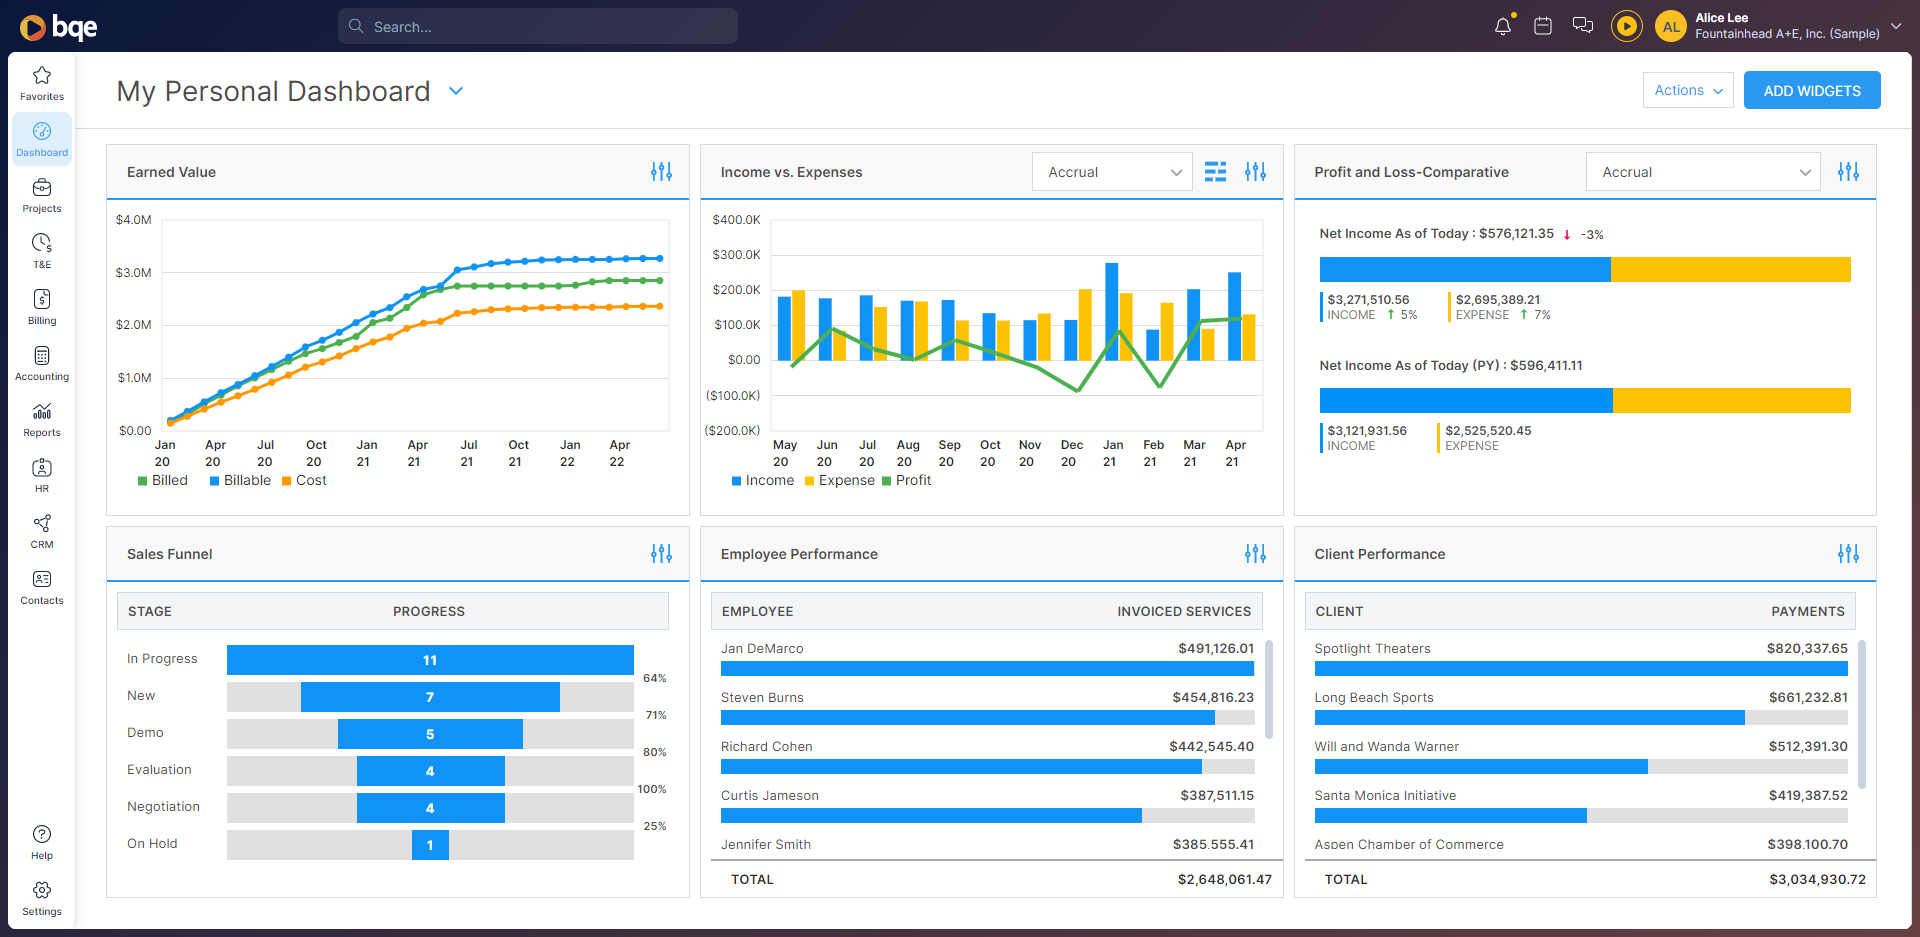 BQE CORE Suite Software - Reporting and Analytics